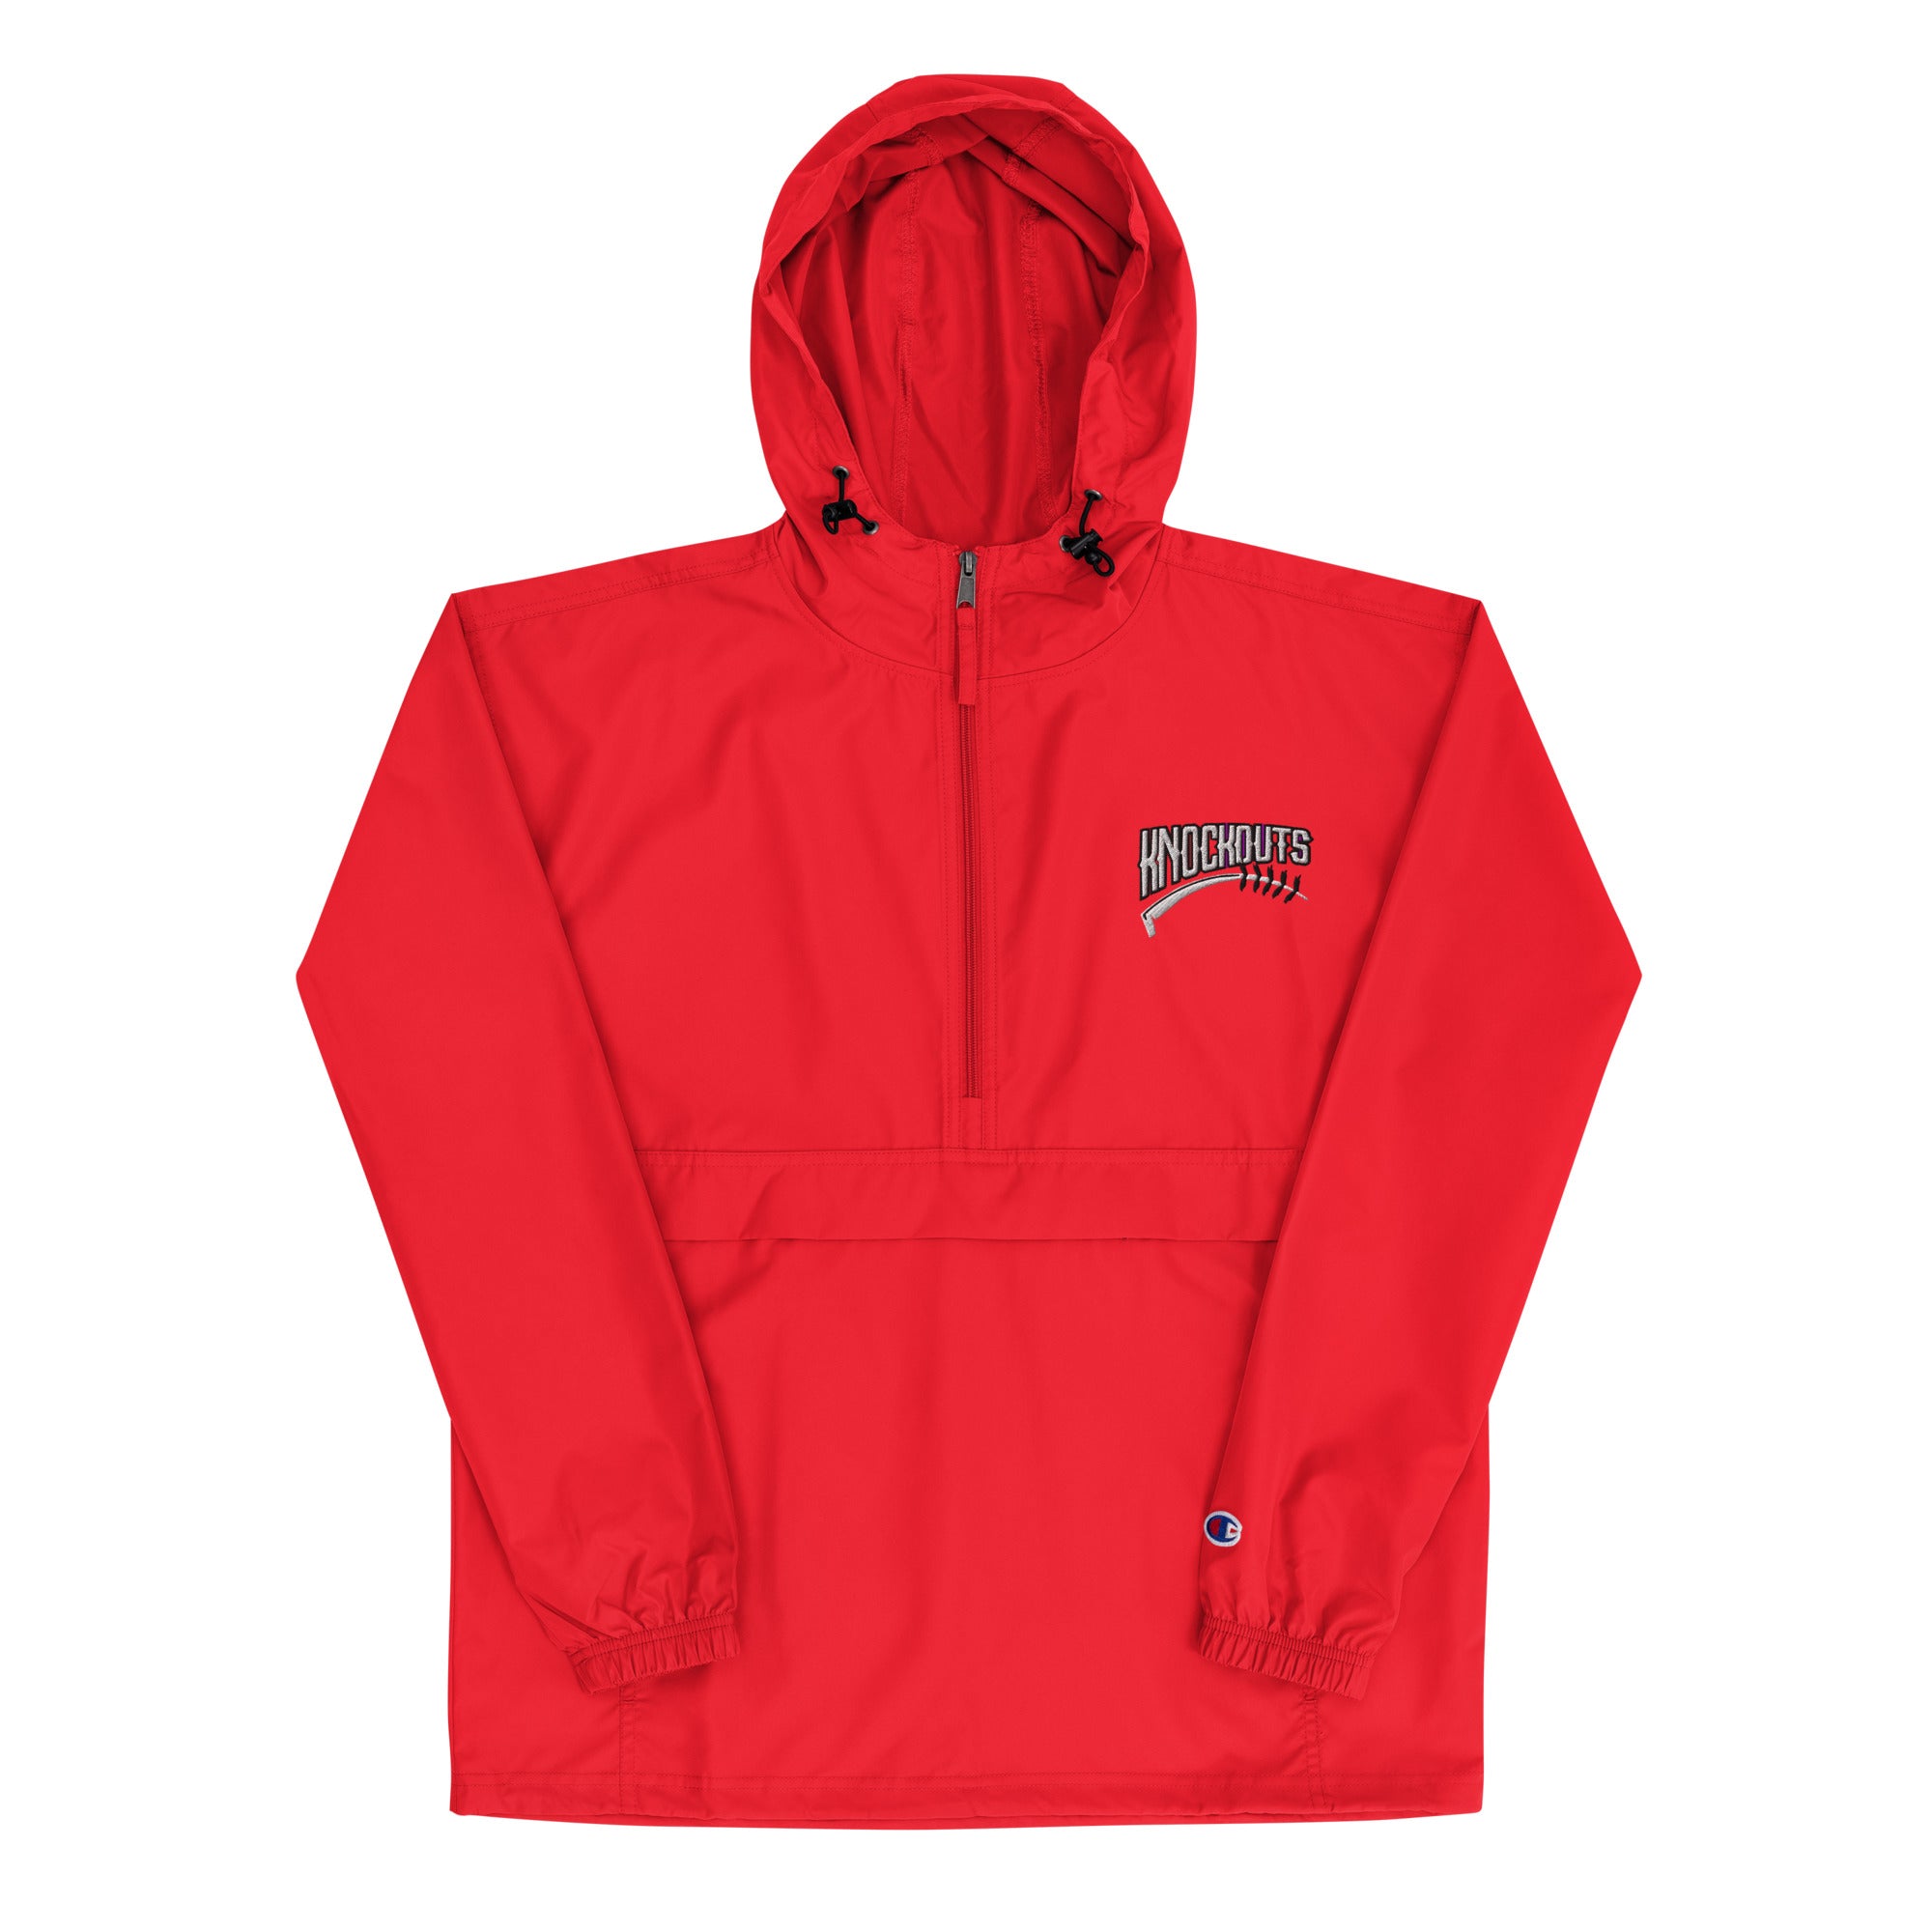 Knockouts Embroidered Champion Packable Jacket